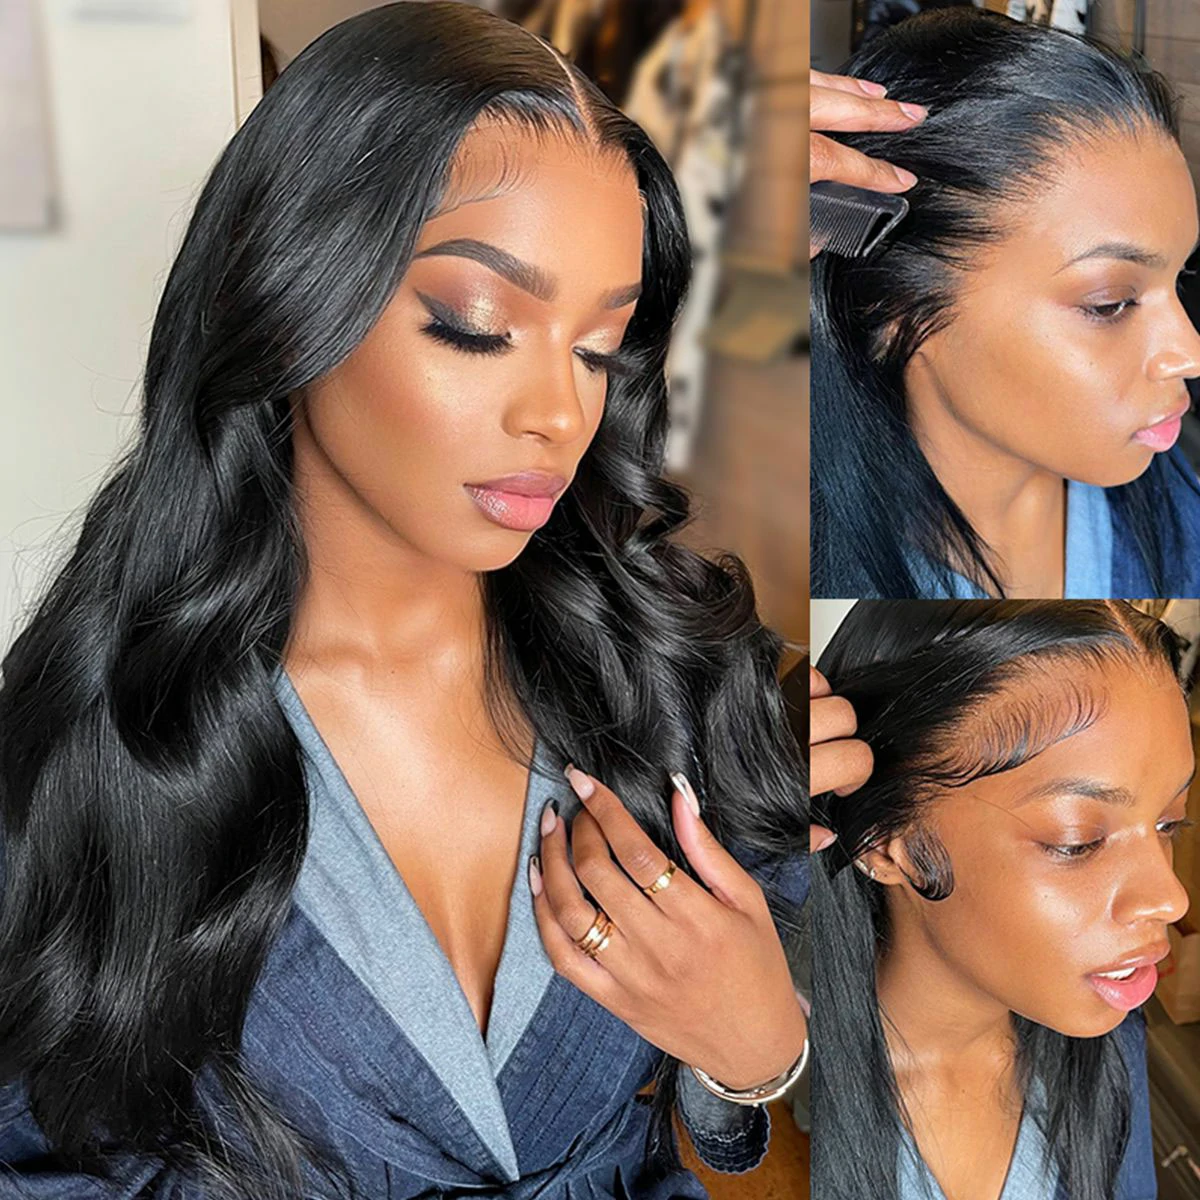 13x6 Hd Lace Frontal Wig, Human Hair Frontal Wig